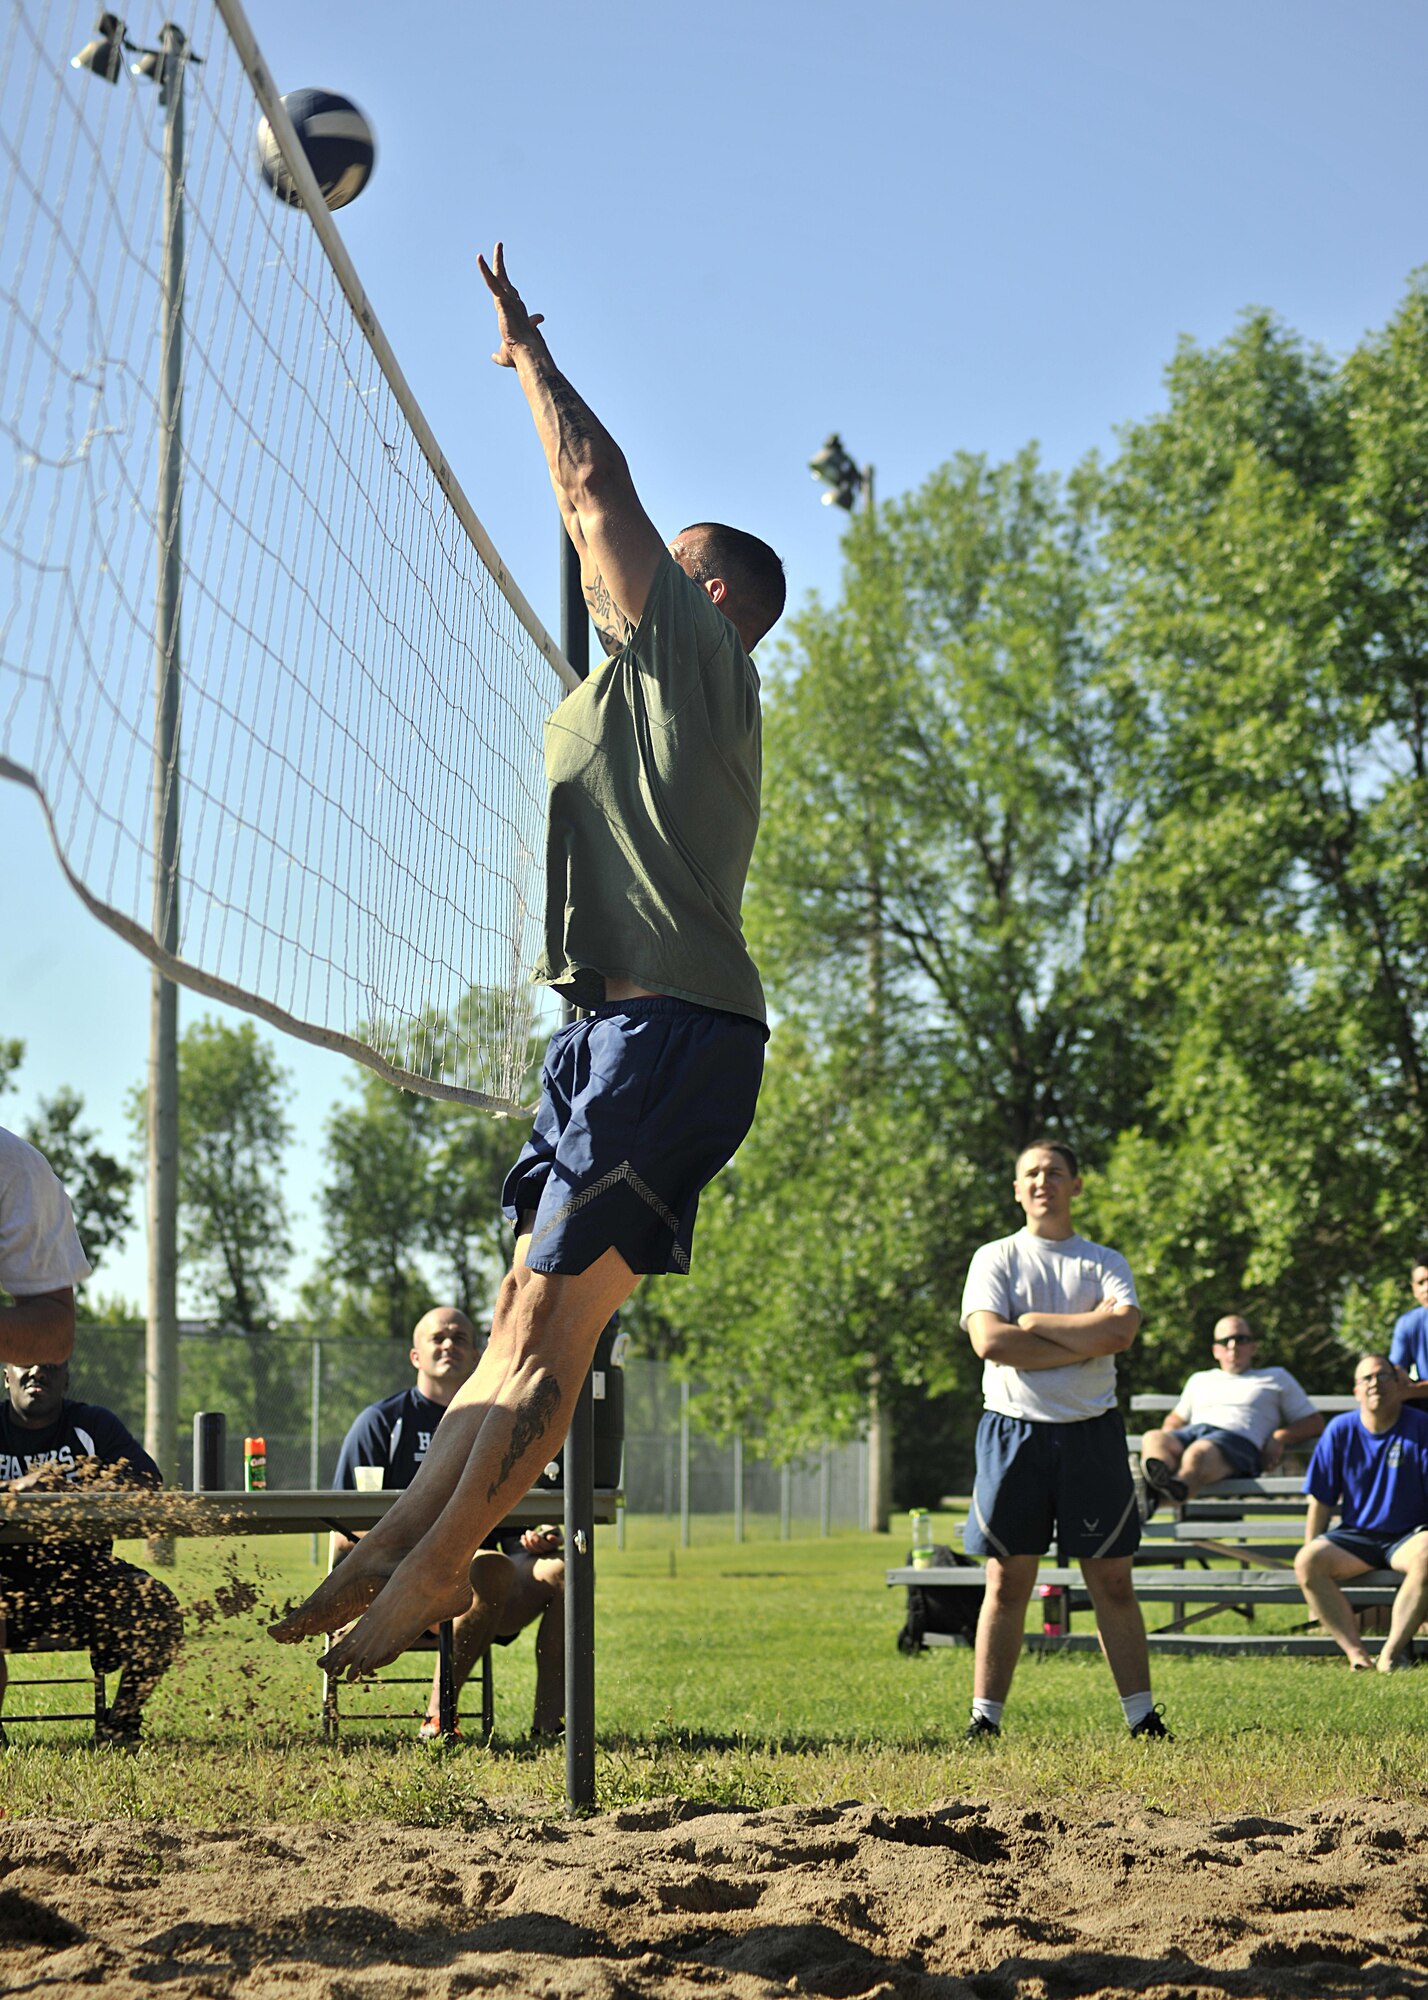 Senior Master Sgt. Brandon Wolfgang, 319th Security Forces Squadron superintendent, jumps to block a during the beach volleyball competition on Aug. 12, 2016, on Grand Forks Air Force Base, N.D. Squadrons from across the base participated in 14 different events during the annual Summer Bash. (U.S. Air Force photo by Senior Airman Xavier Navarro/Released)